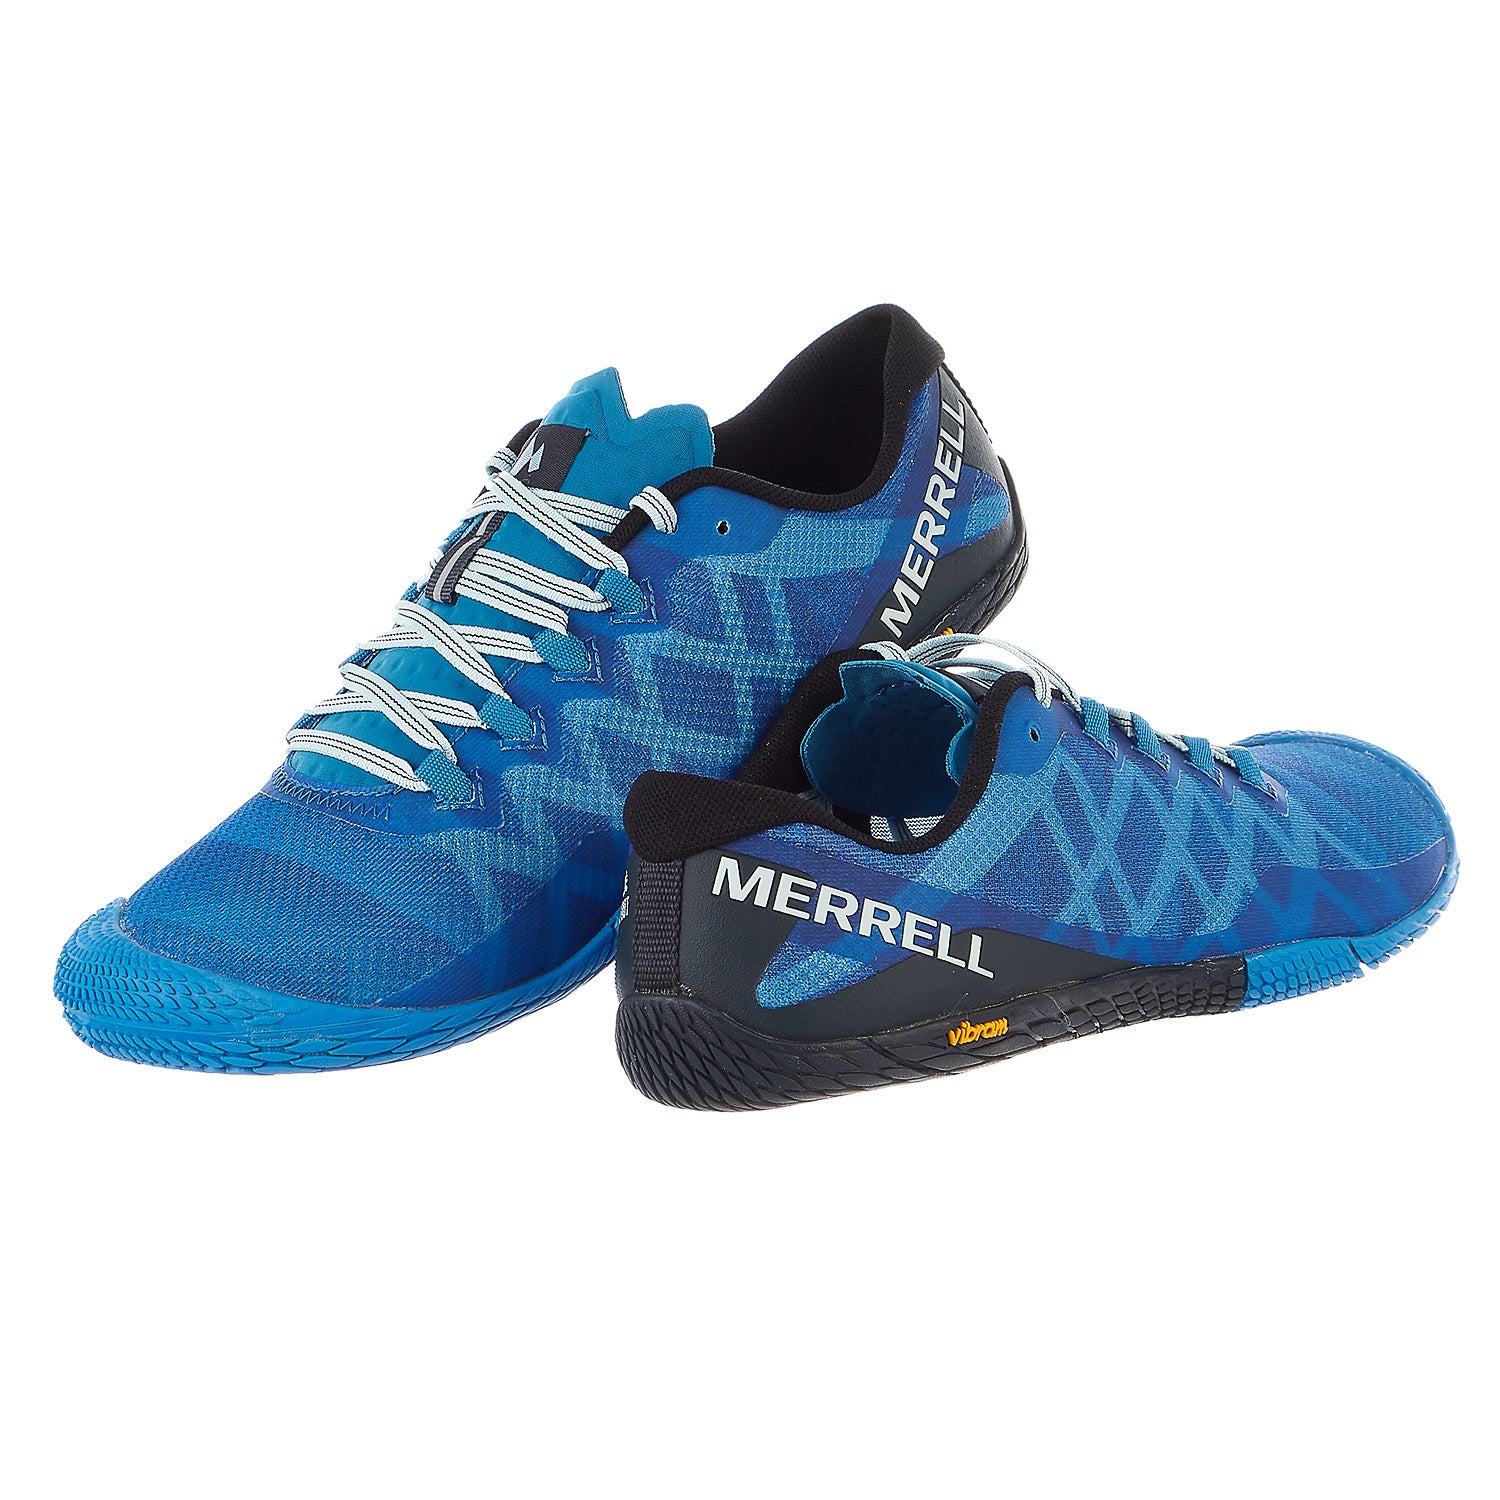 Merrell Vapor Glove 6 J067667 Barefoot Training Athletic Trainers Shoes  Mens